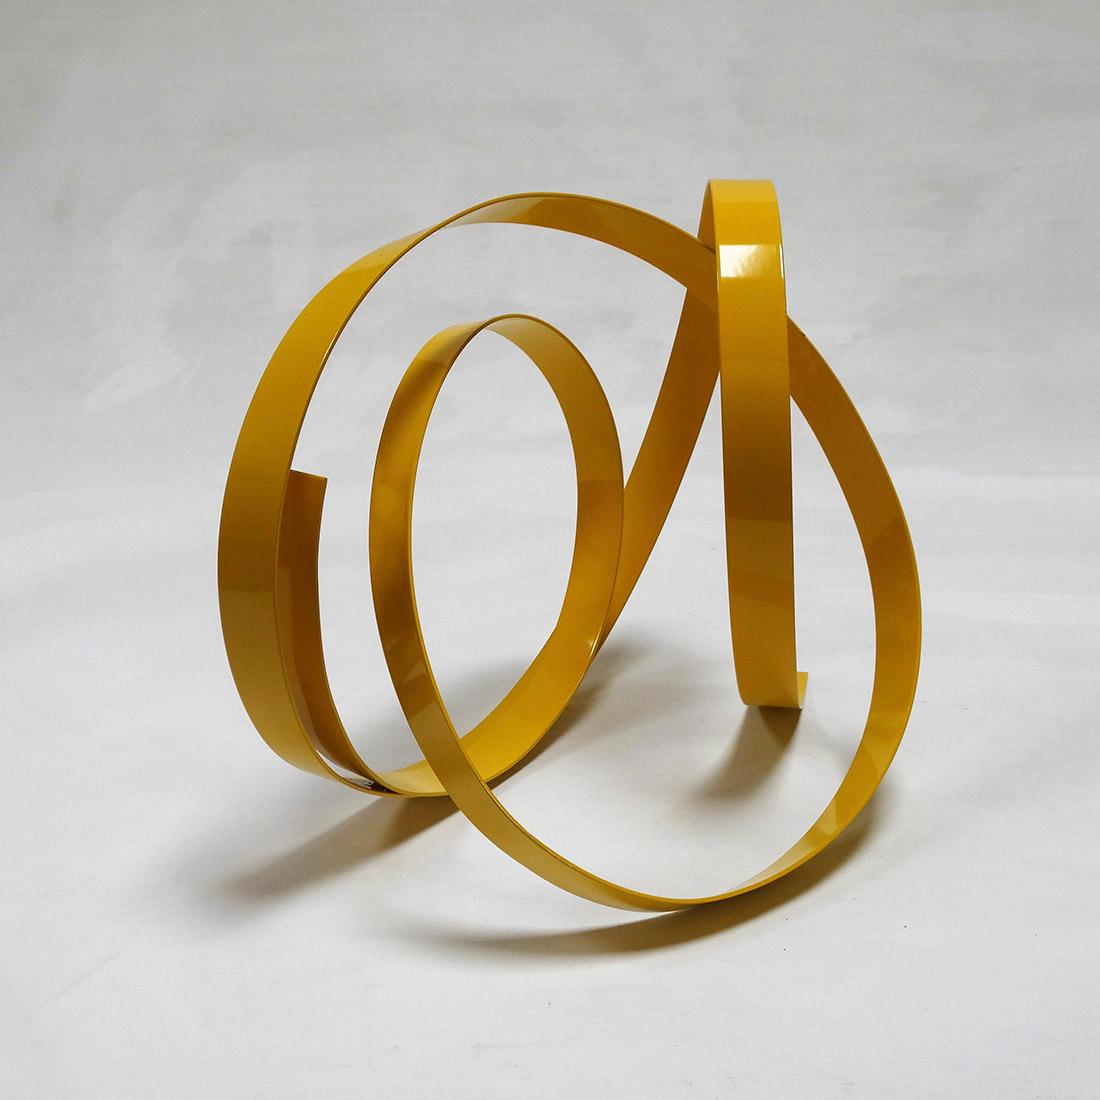 Corbant Yellow 5 - Abstract, Outdoor Sculpture, Contemporary, Art, Rafael Amorós For Sale 1